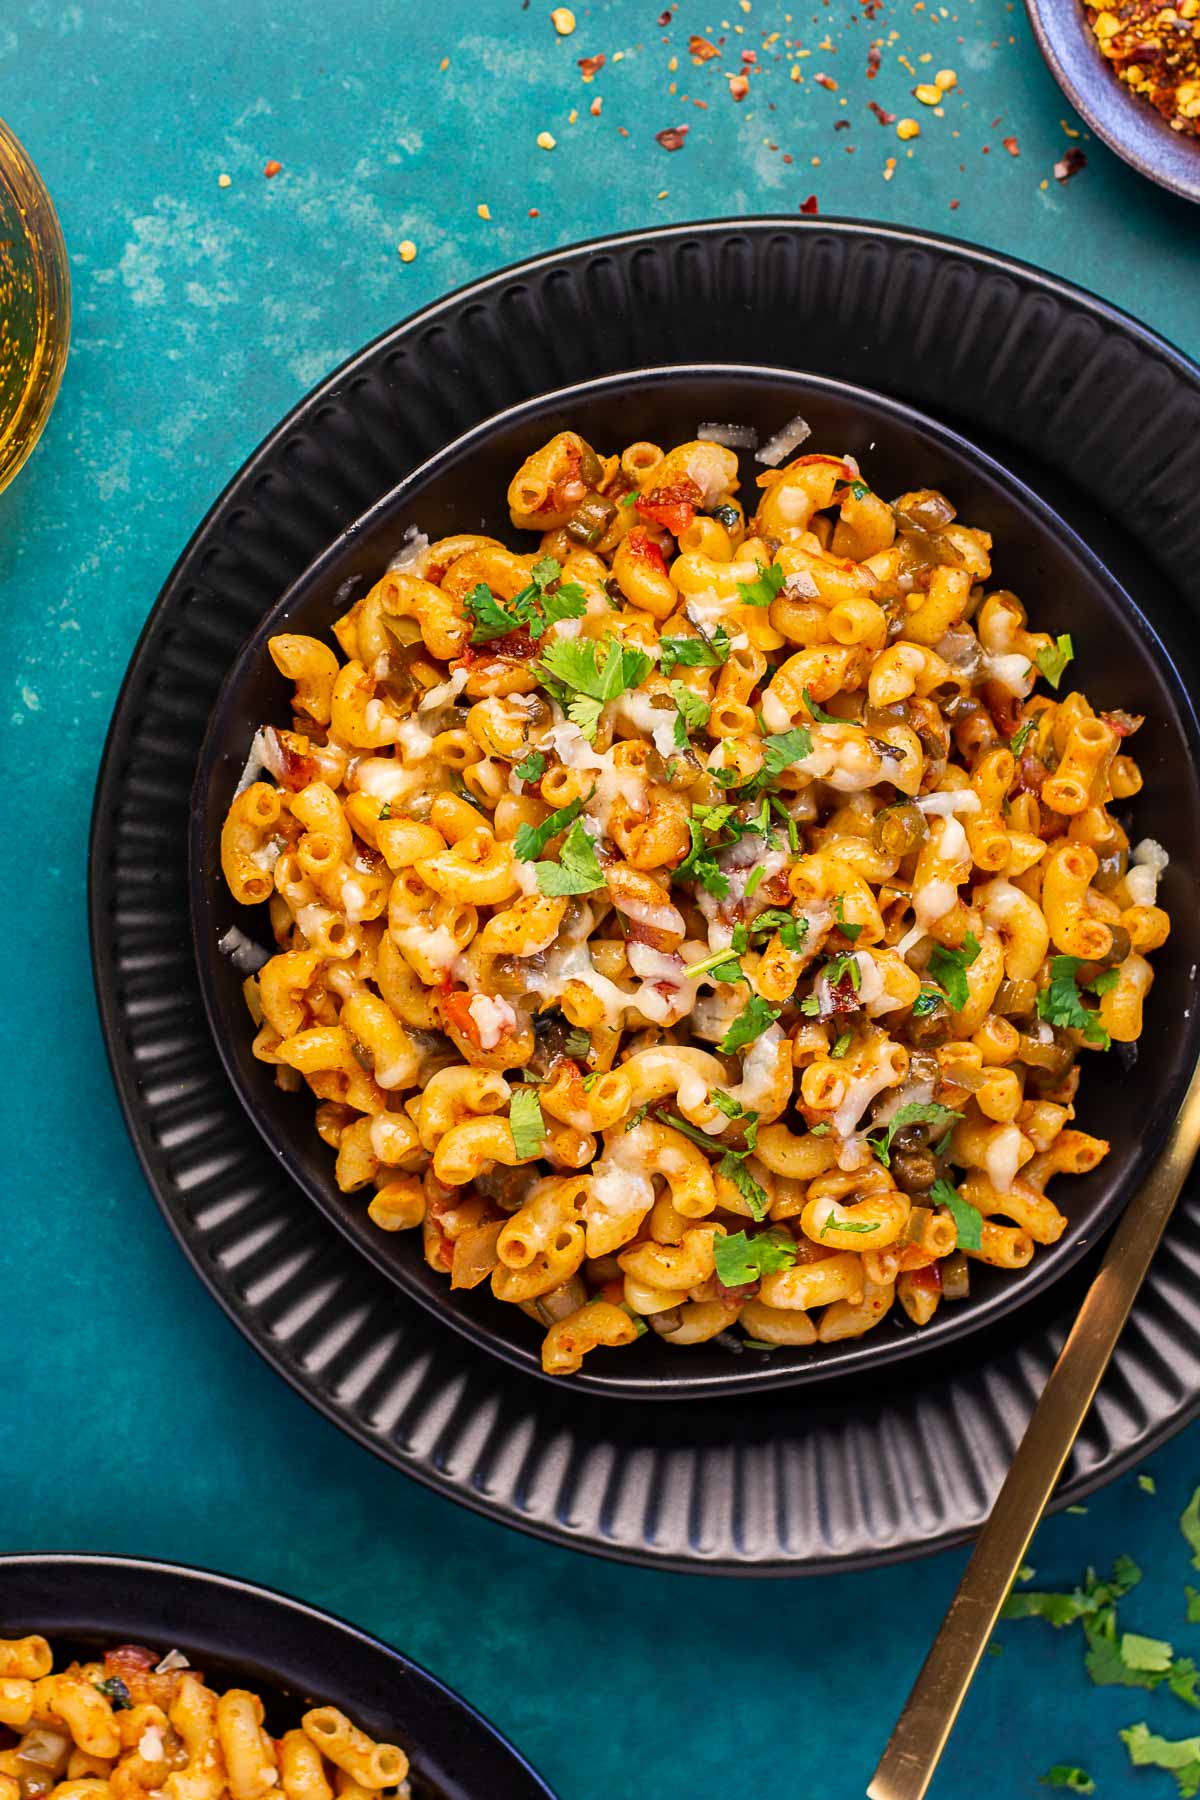 Masala macaroni topped with cheese, red pepper flakes and cilantro served in a black bowl